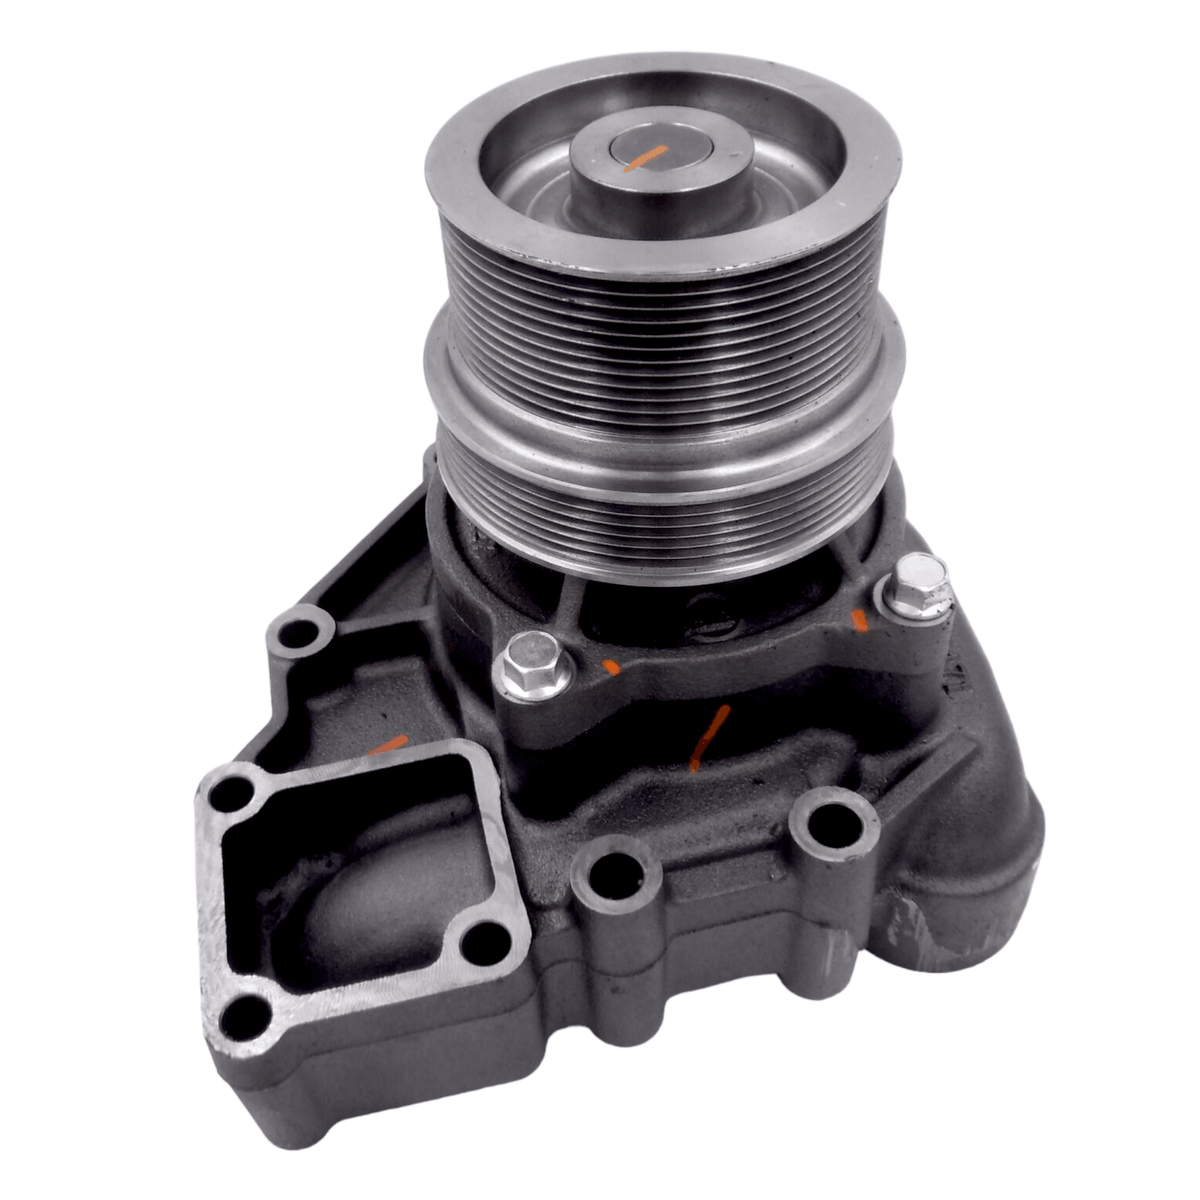 5406048RX Genuine Cummins Water Pump 12 Ribs Pully / Rib Pully For Isx